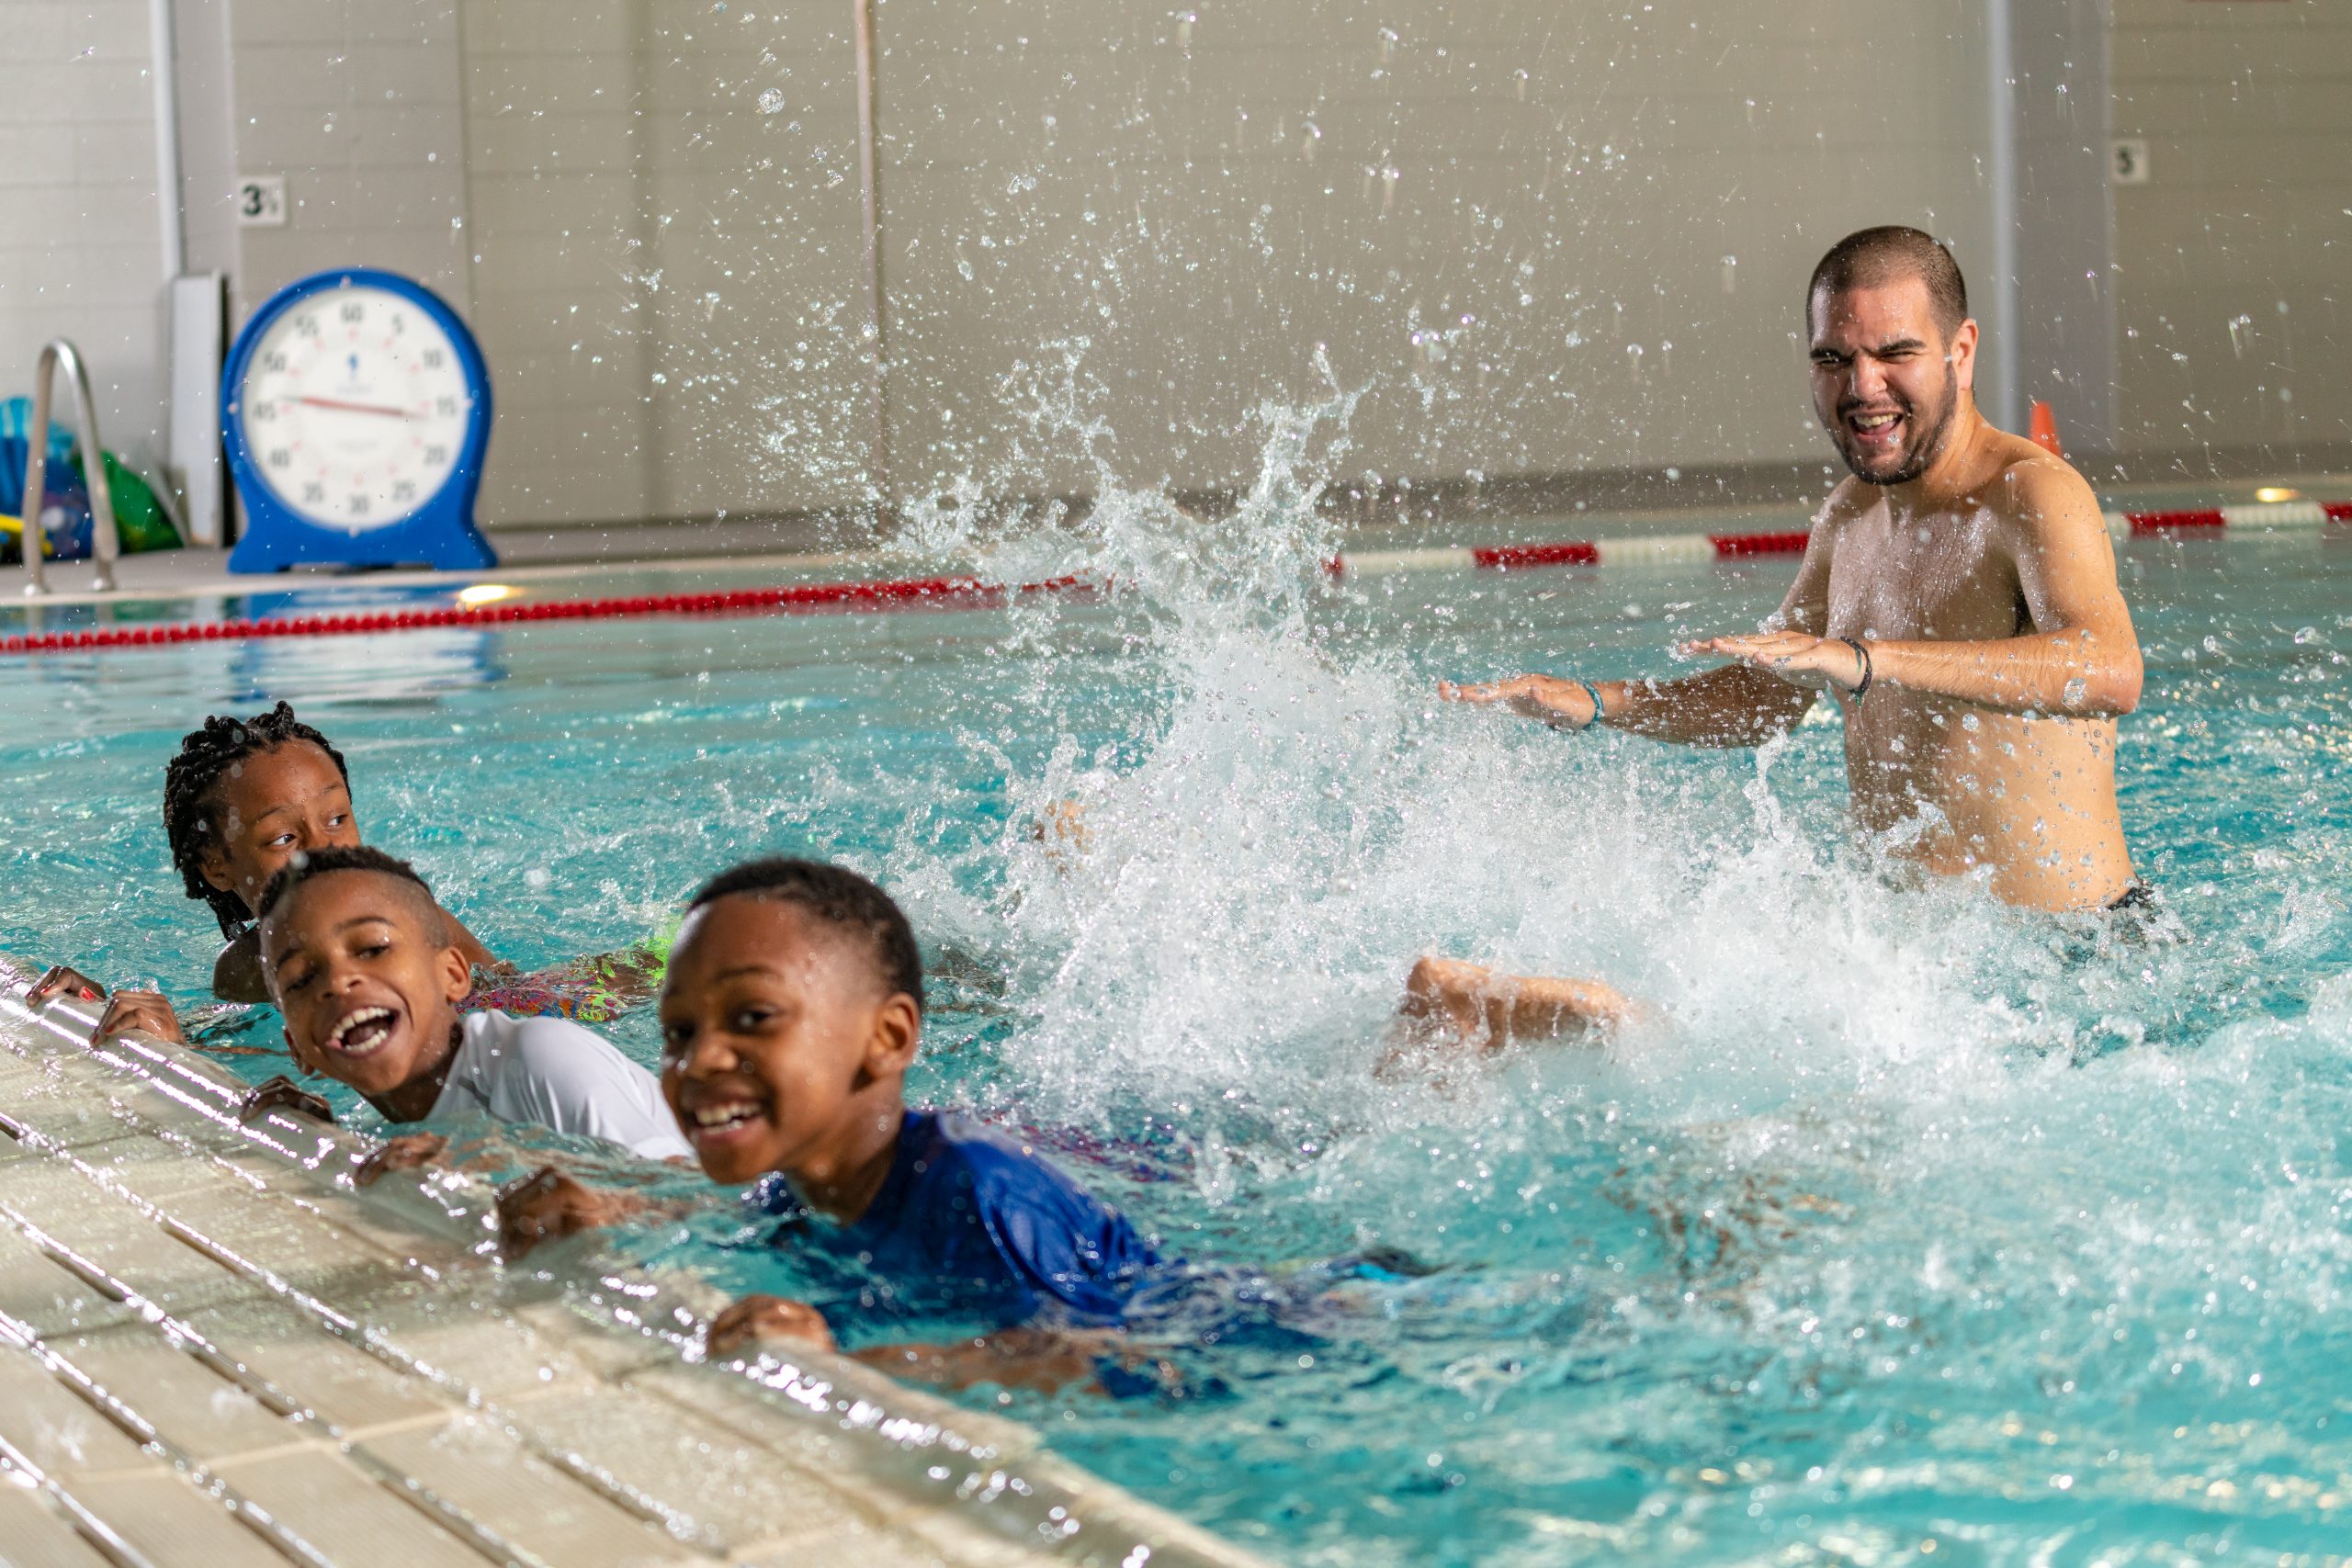 Children kicking feet from the side of the pool while instructor smiles and splashes.